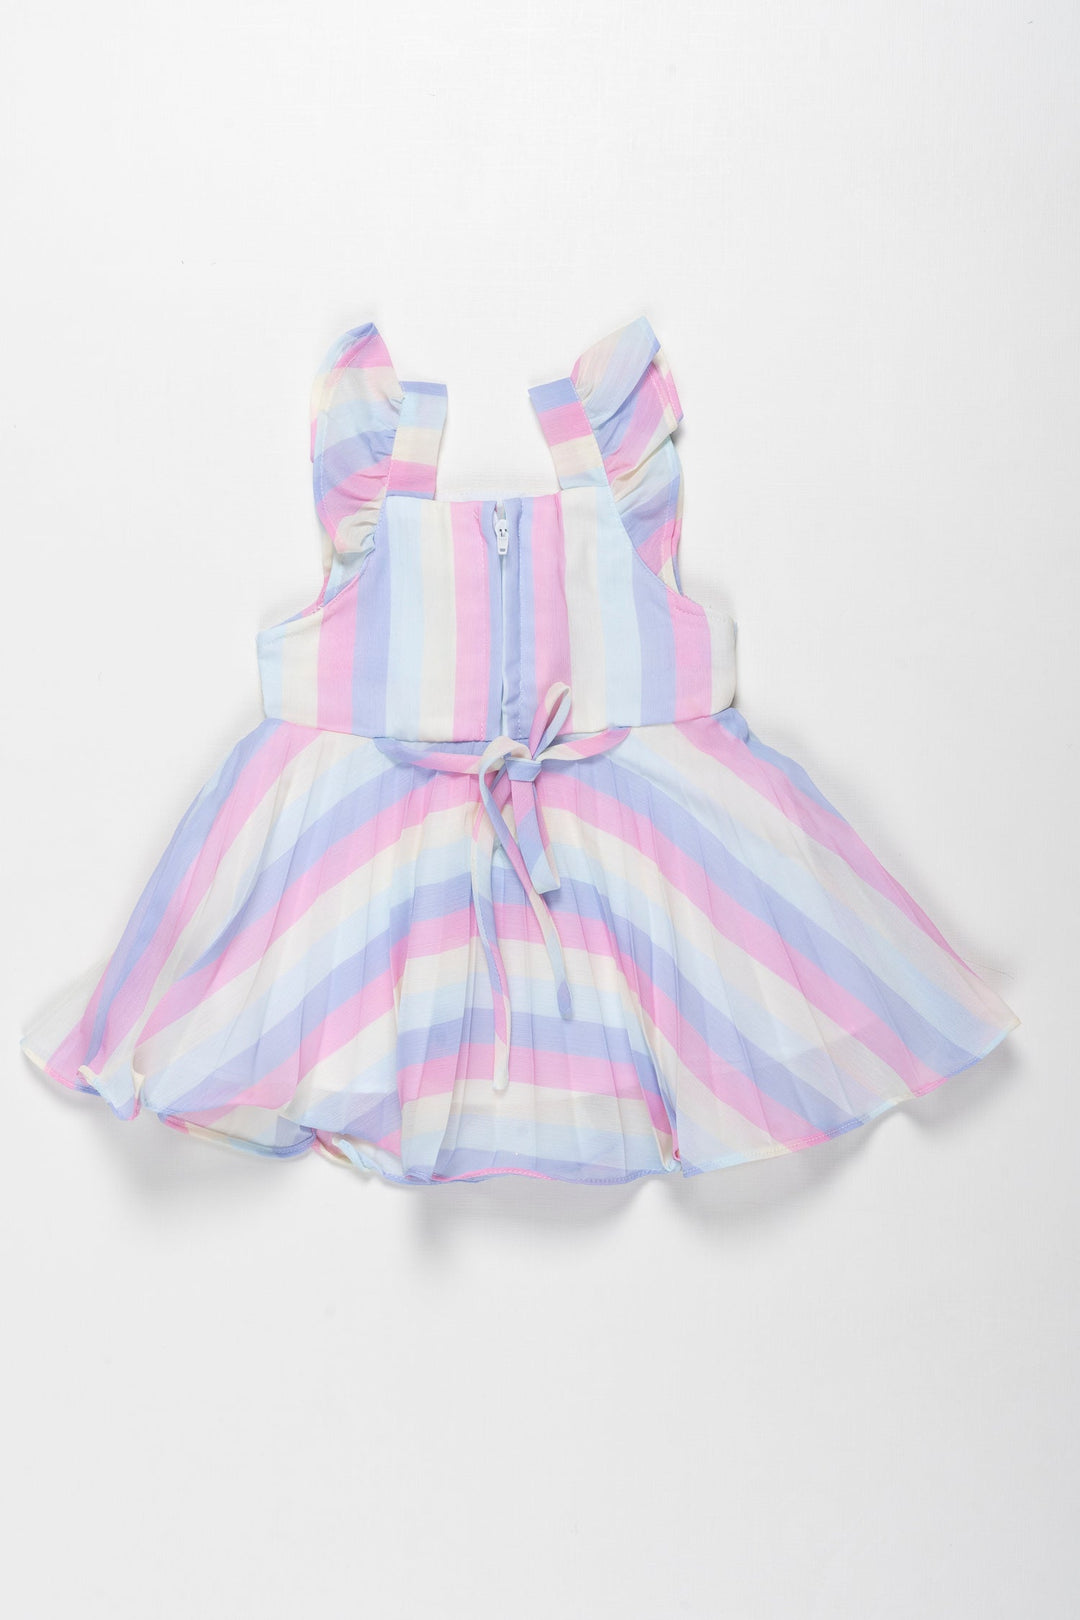 The Nesavu Baby Fancy Frock Pastel Paradise Stripe Infant Dress with Dainty Bow - Chic Summer Baby Wear Nesavu Chic Striped Baby Sundress with Bow Accent | Cool Infant Summer Fashion | The Nesavu